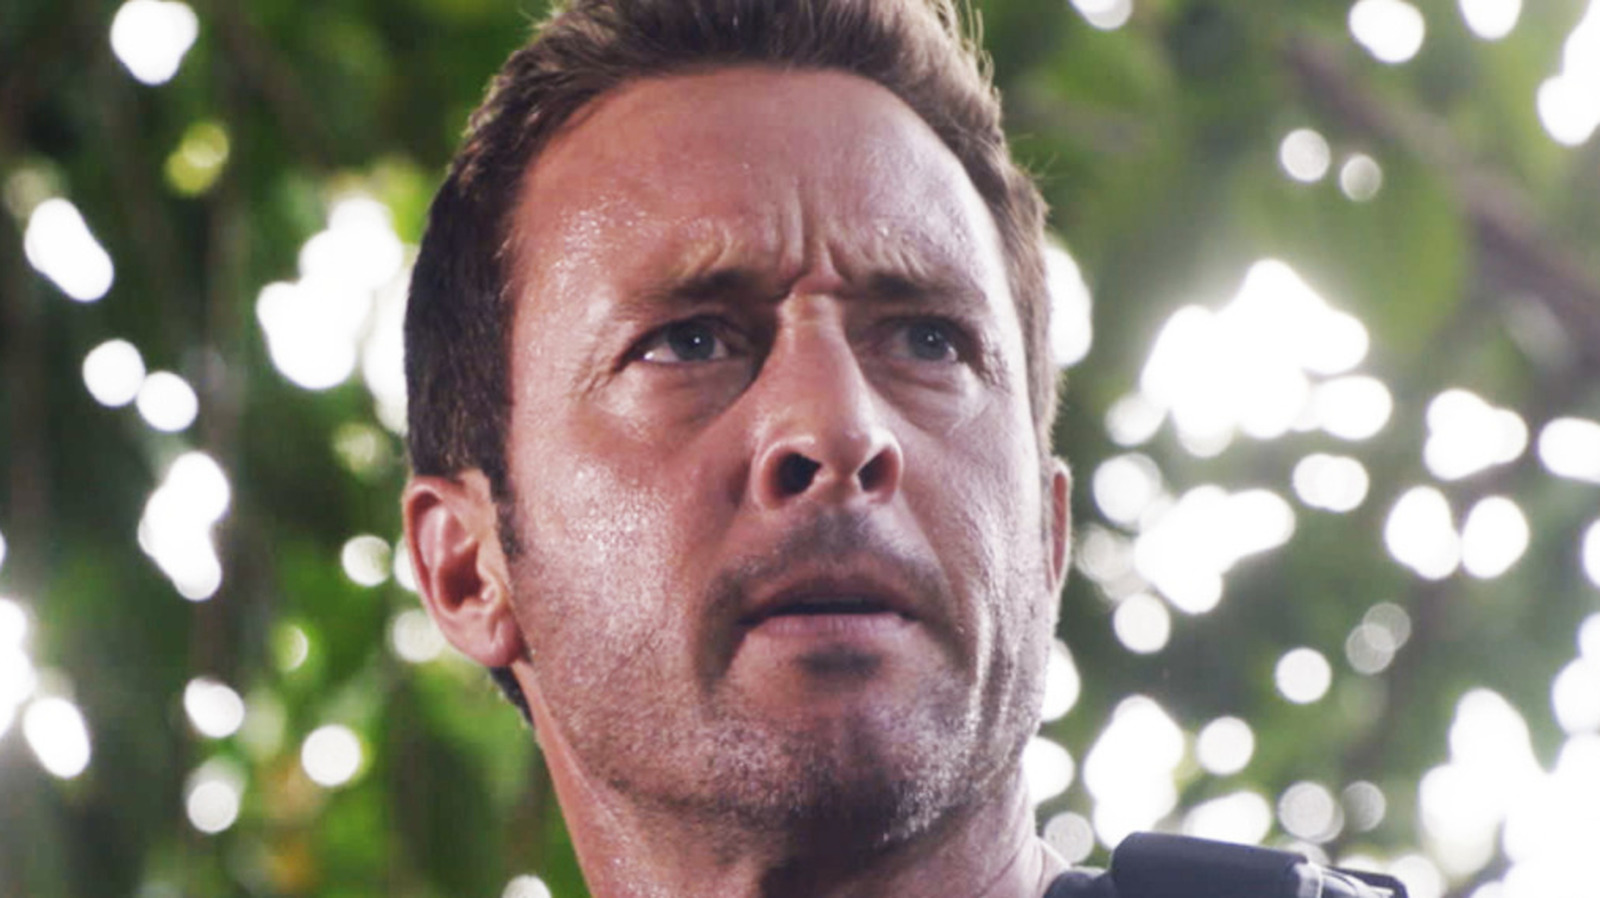 The Lawsuit Against Hawaii Five-0 You Didn't Know About